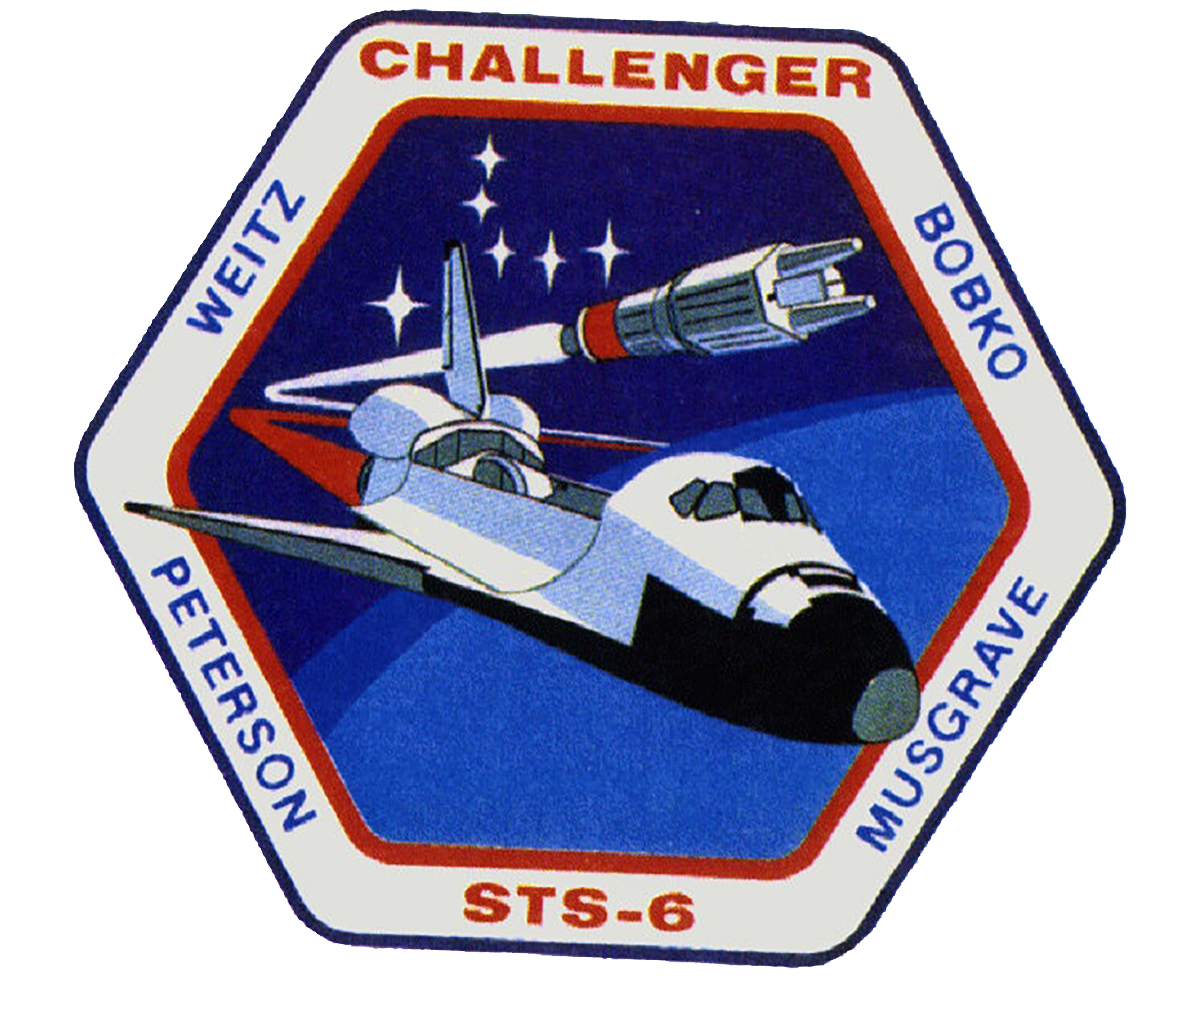 STS-6 (Challenger)